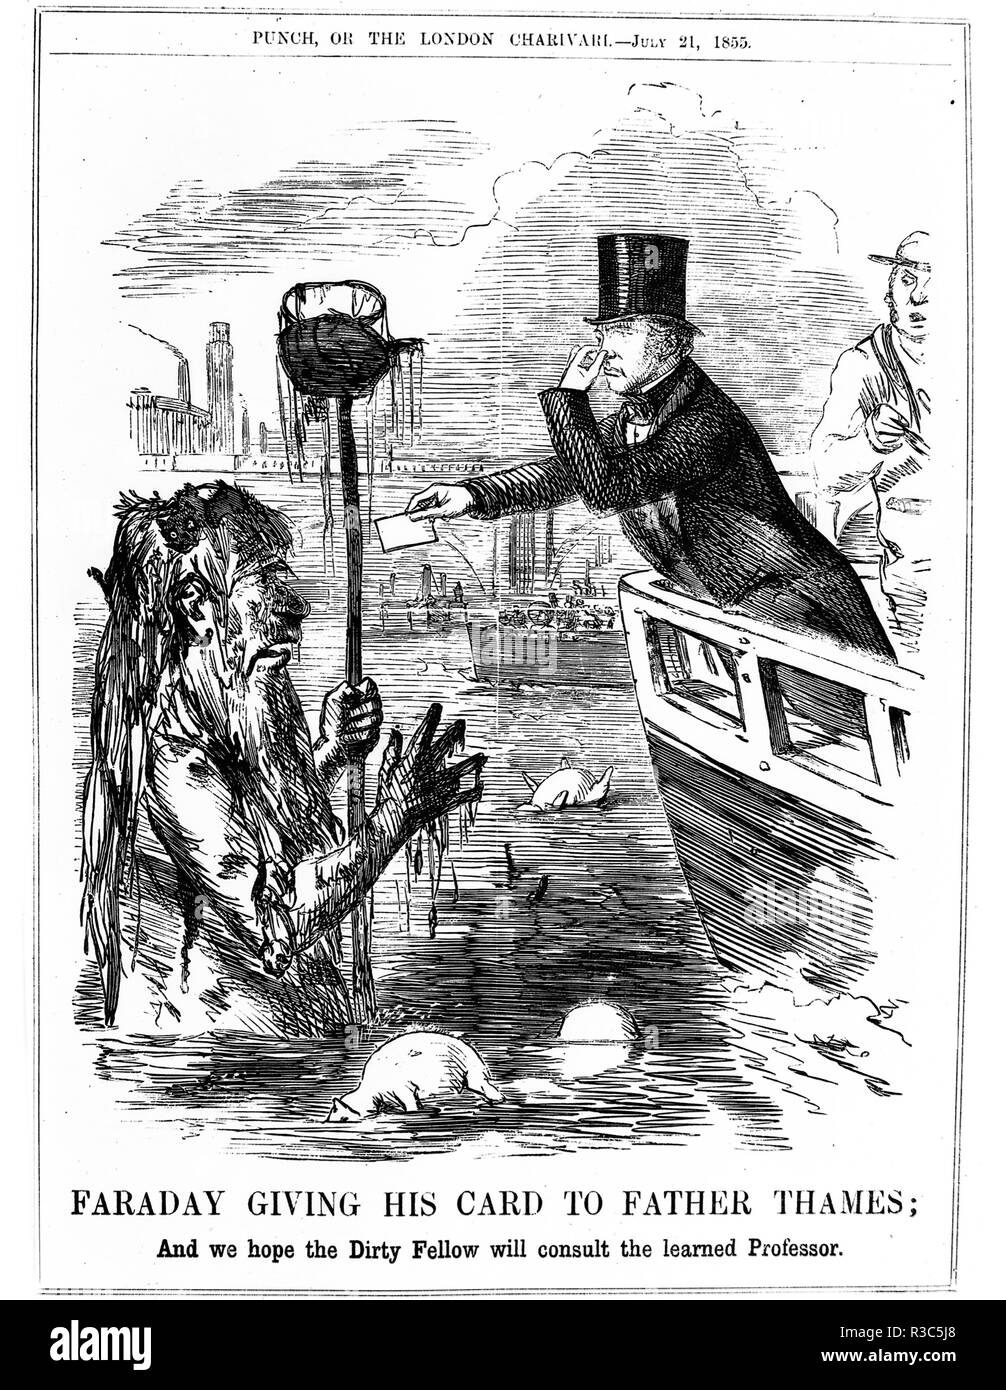 MICHAEL FARADY 1791-1867) English scientist  giving his card to Father Thames, Punch cartoon July 1855 following Faraday's letter on the state of the Thames in The Times in July 1855. Stock Photo